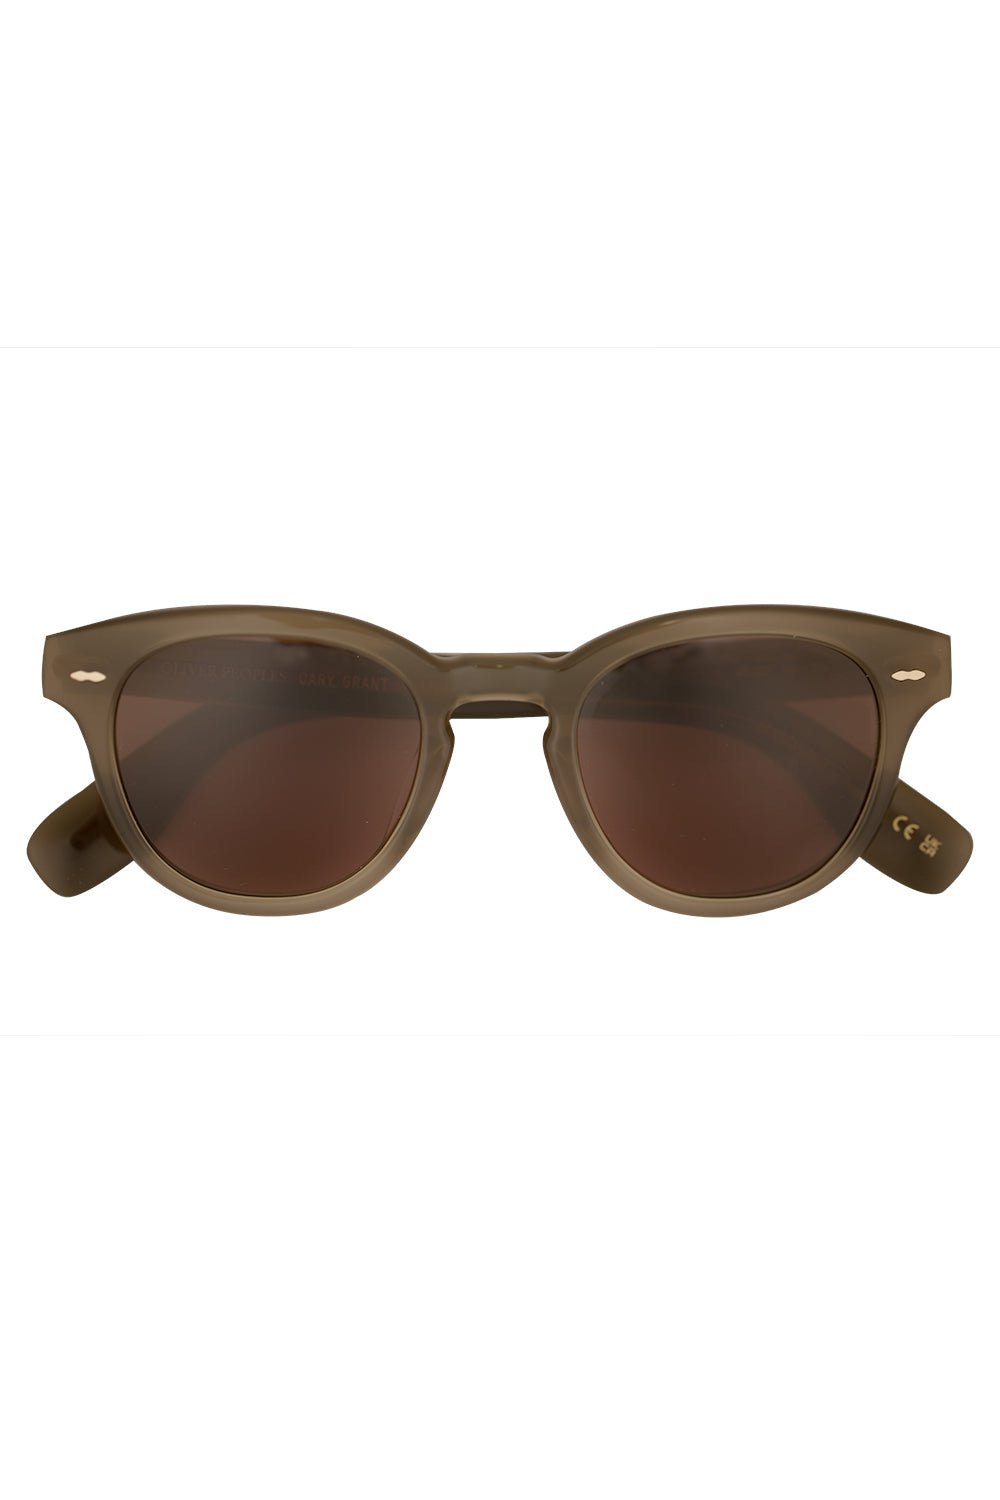 Cary Grant Sunglasses ACCESSORIESUNGLASSES OLIVER PEOPLES   